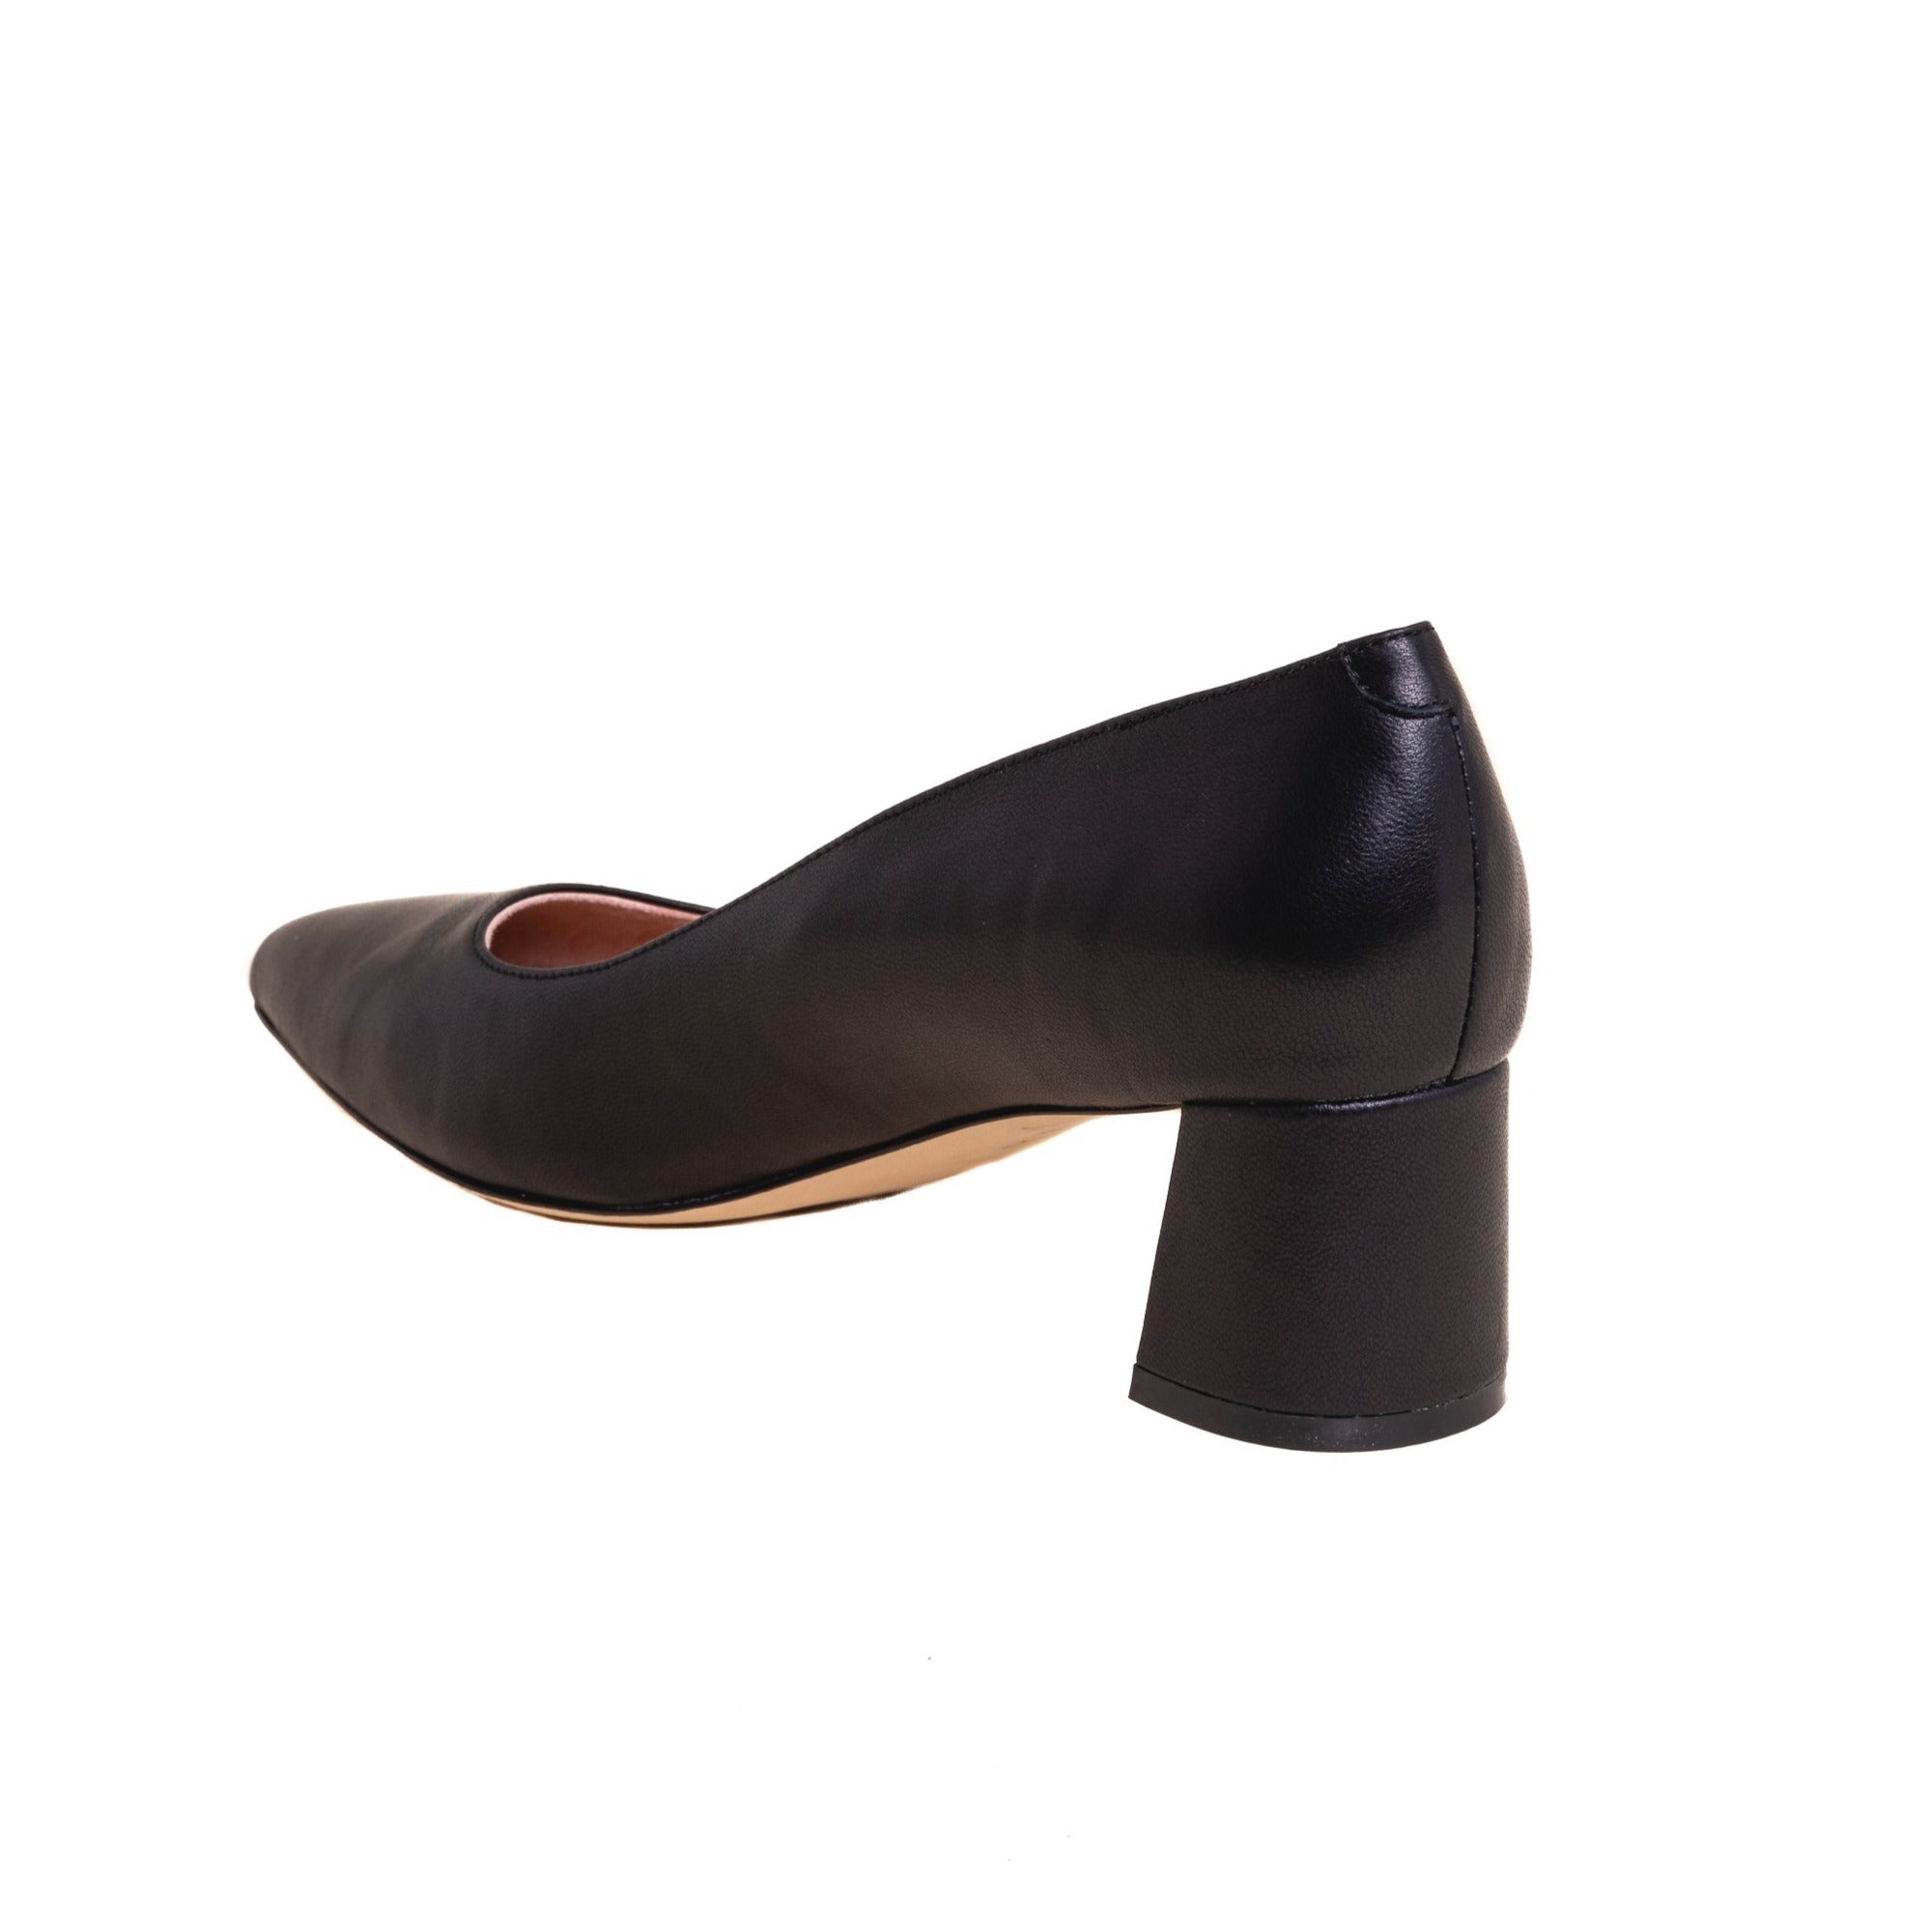 Women' Business Leather Lower Block Heel - Black NORA GARDNER | OFFICIAL STORE for work and office